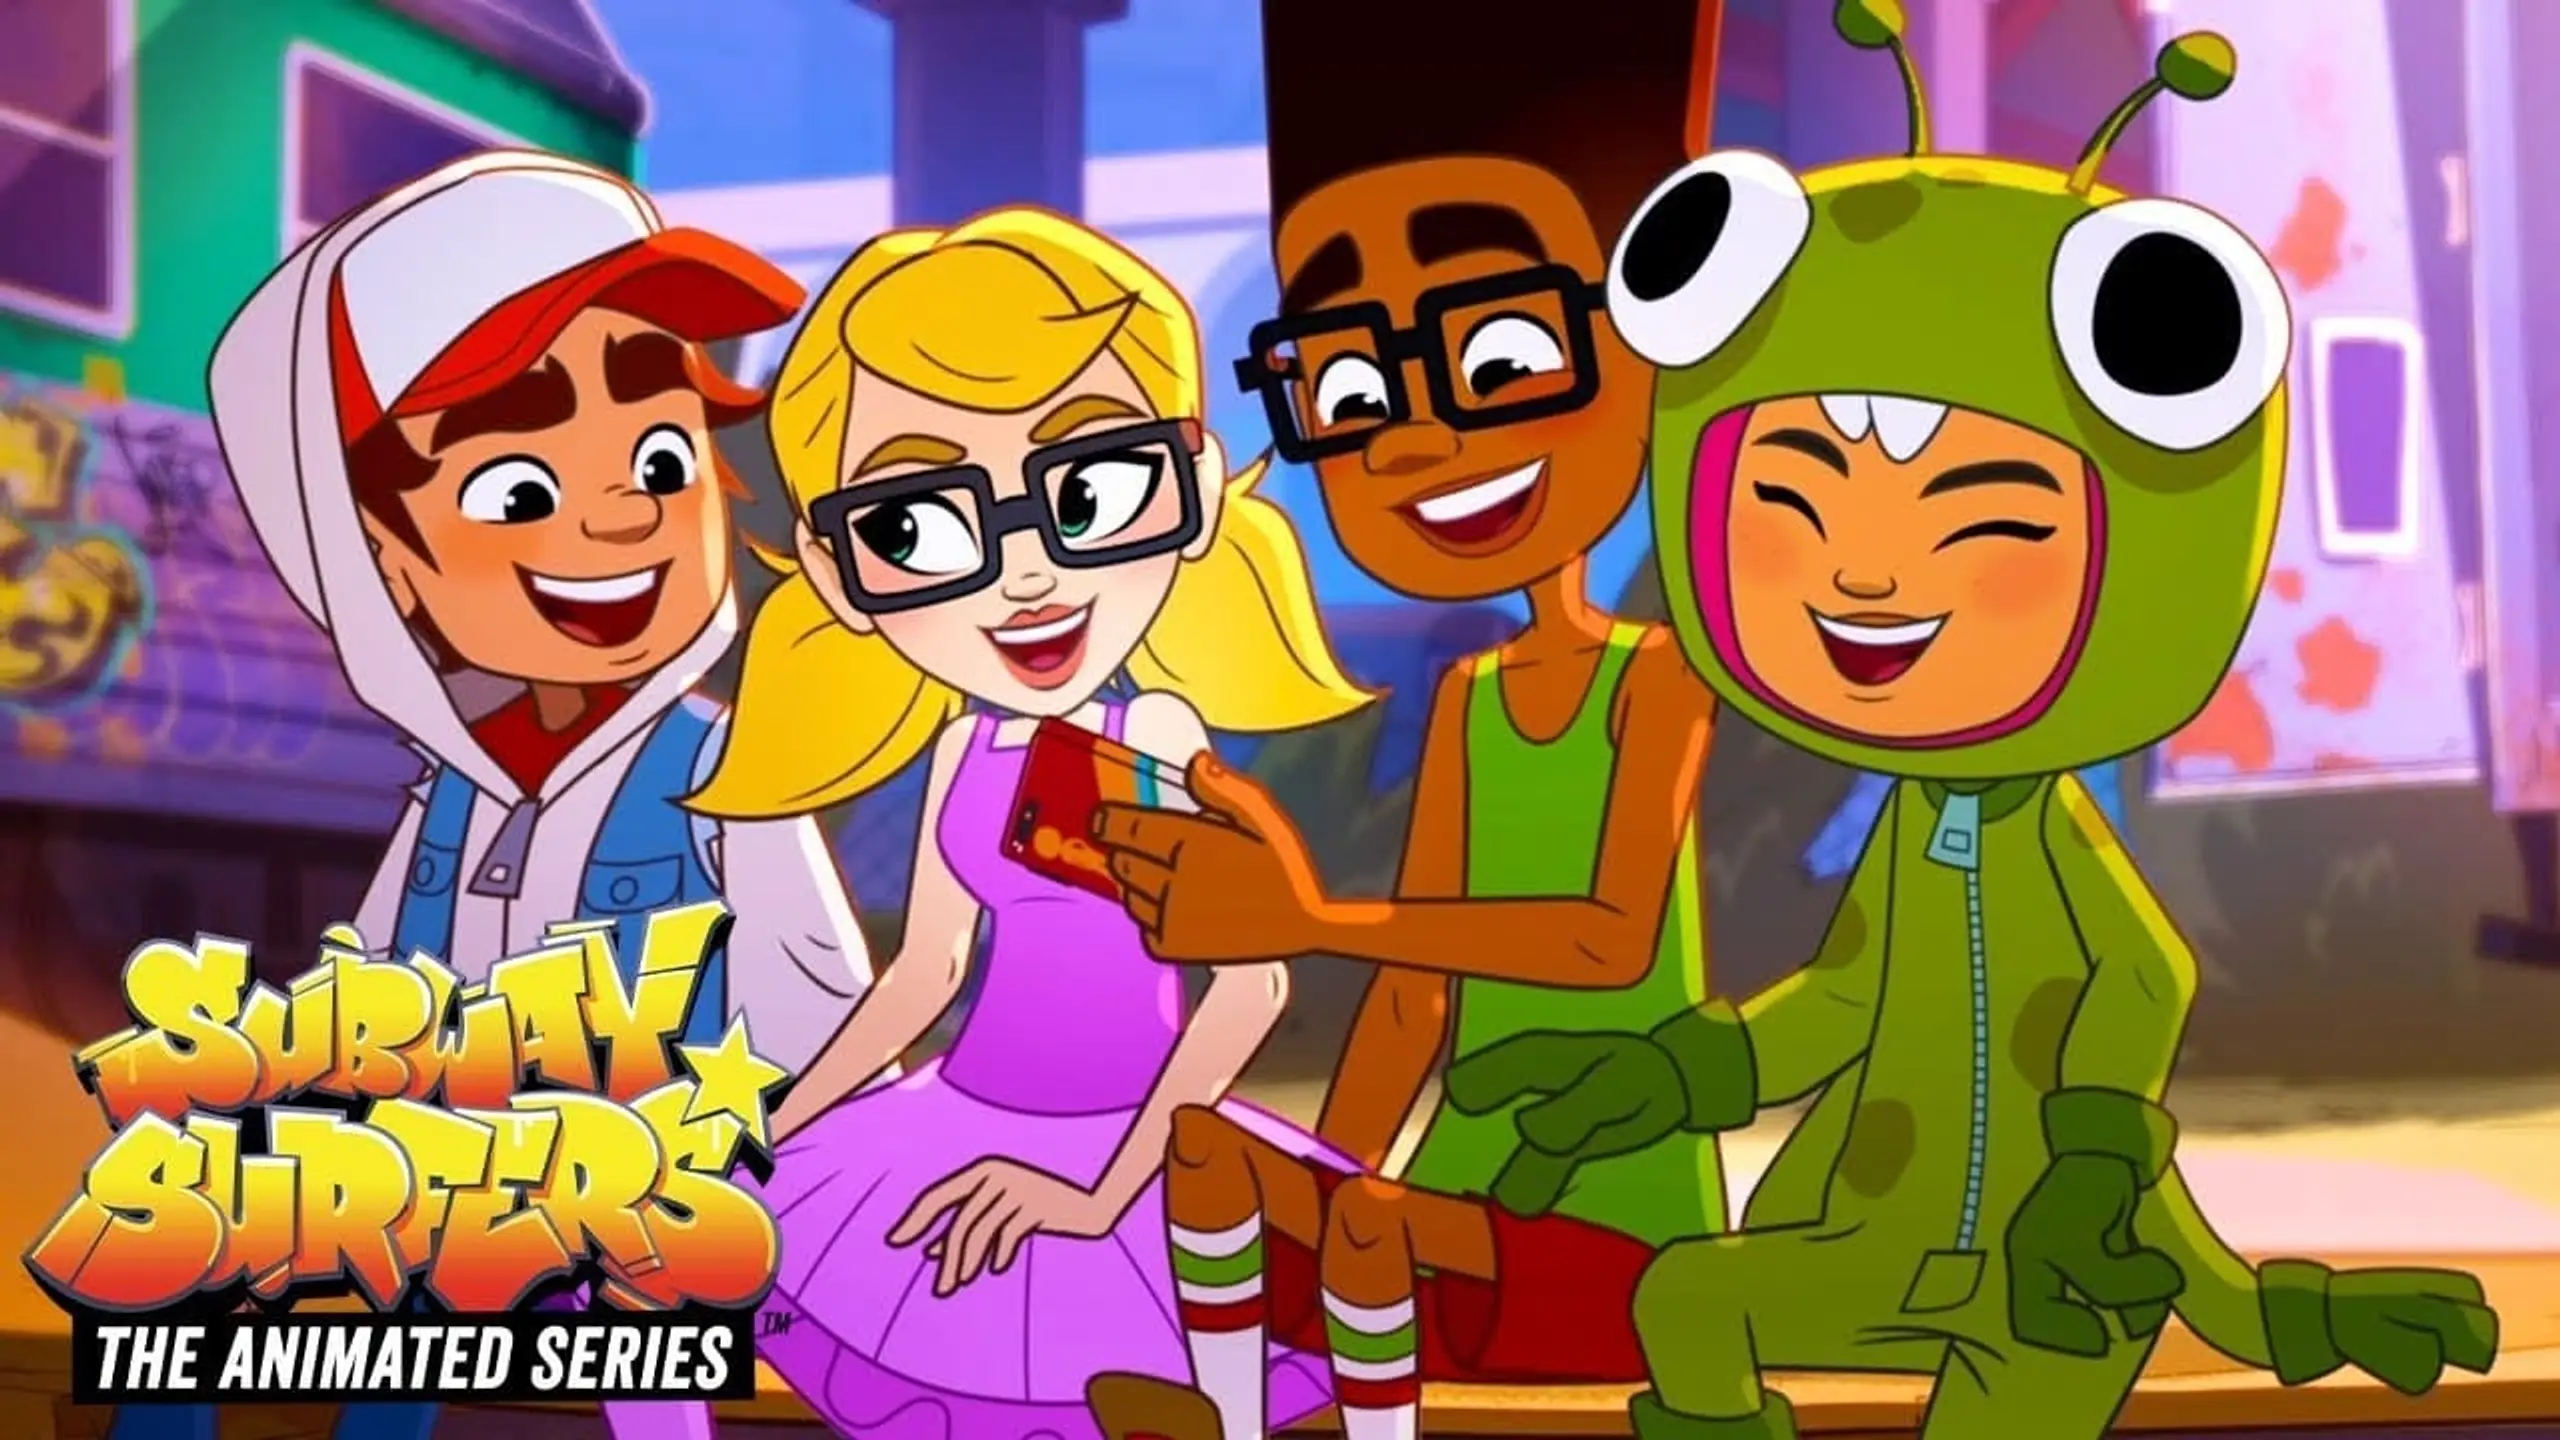 Subway Surfers: The Animated Series